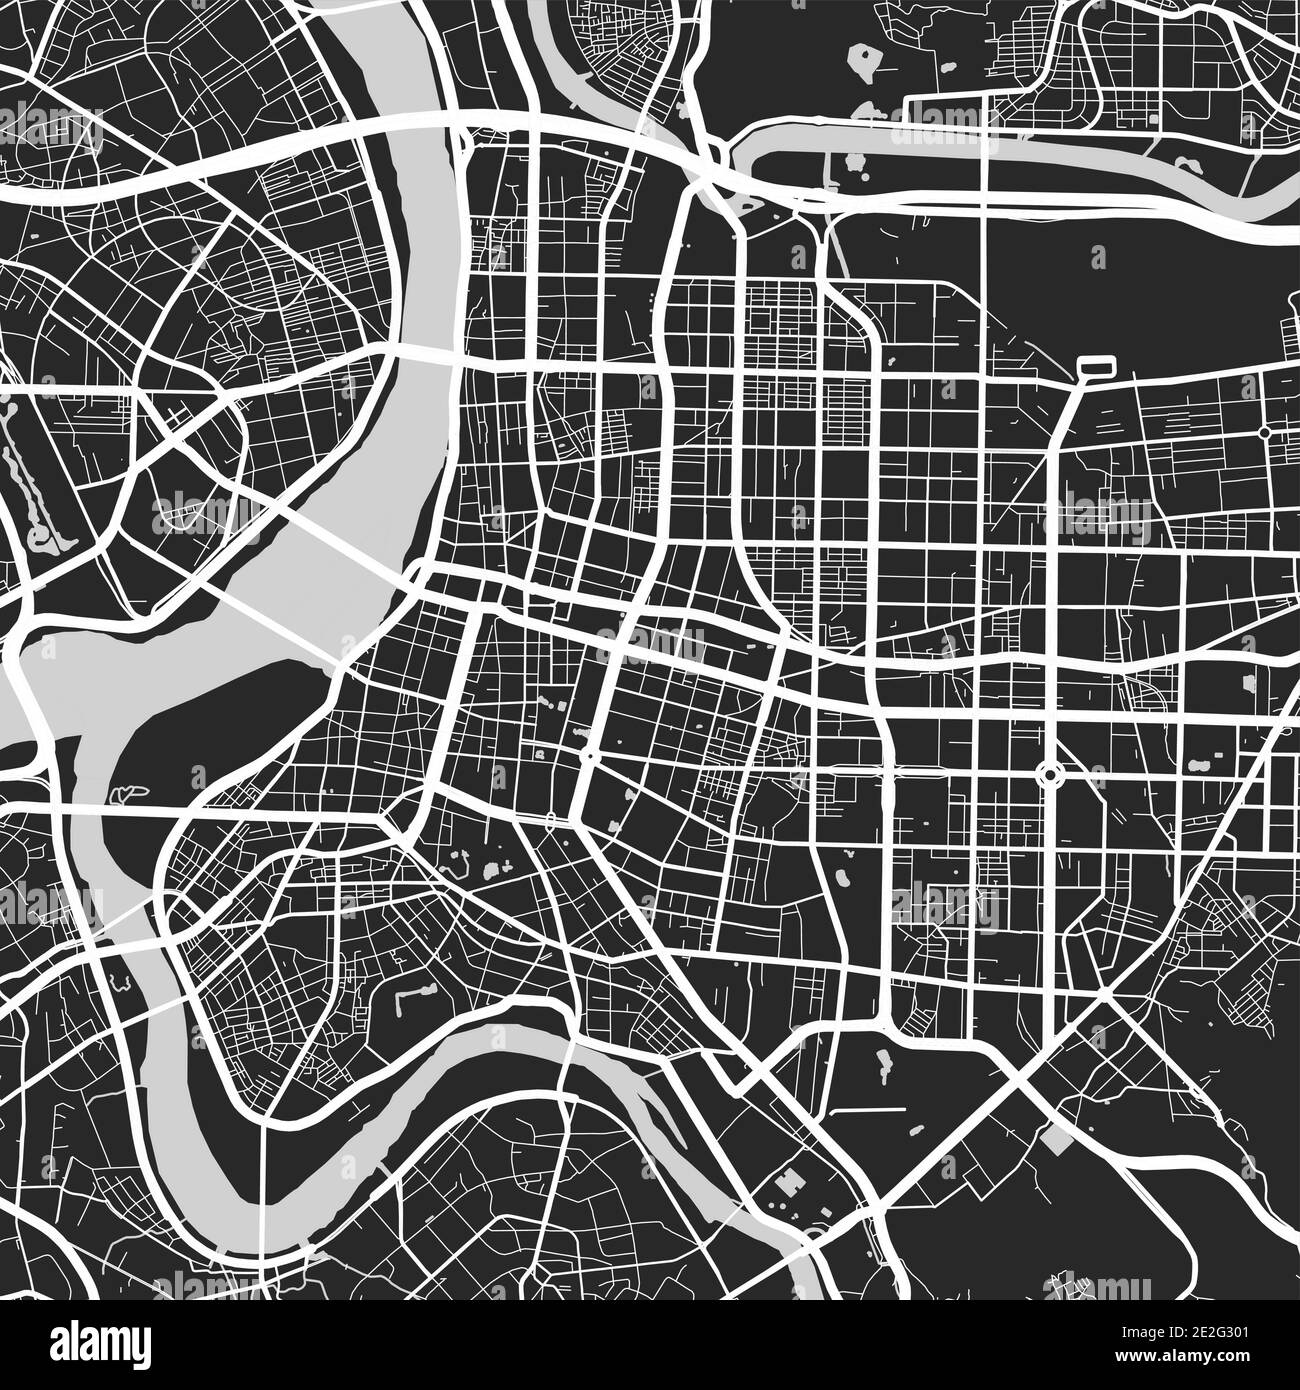 Urban city map of Taipei. Vector illustration, Taipei map grayscale art poster. Street map image with roads, metropolitan city area view. Stock Vector